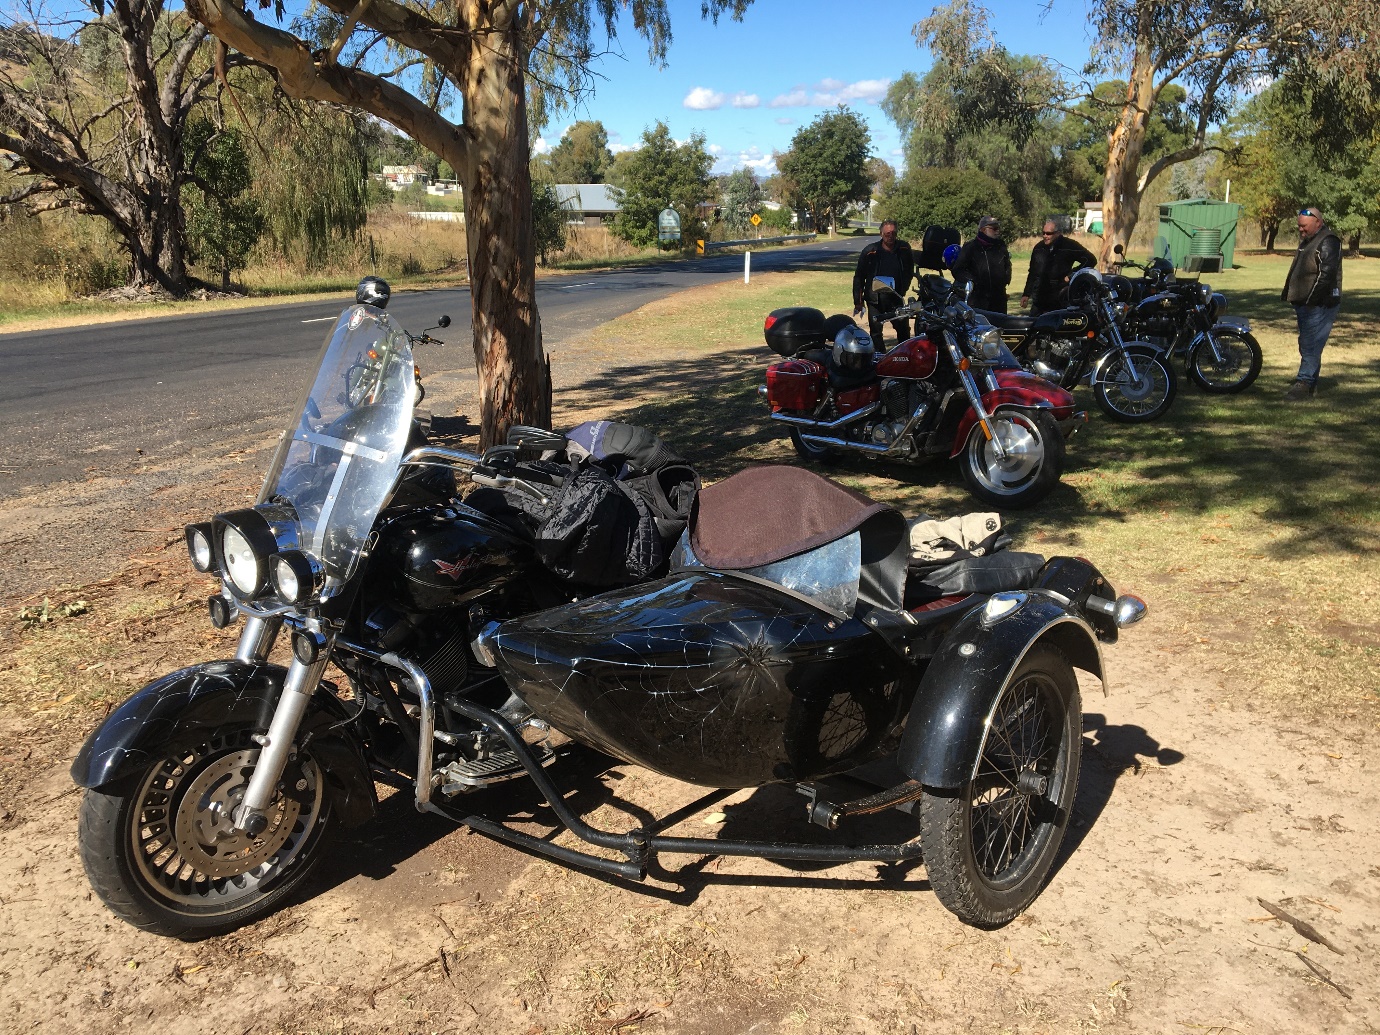 A motorcycle parked on the side of the road

Description automatically generated with medium confidence